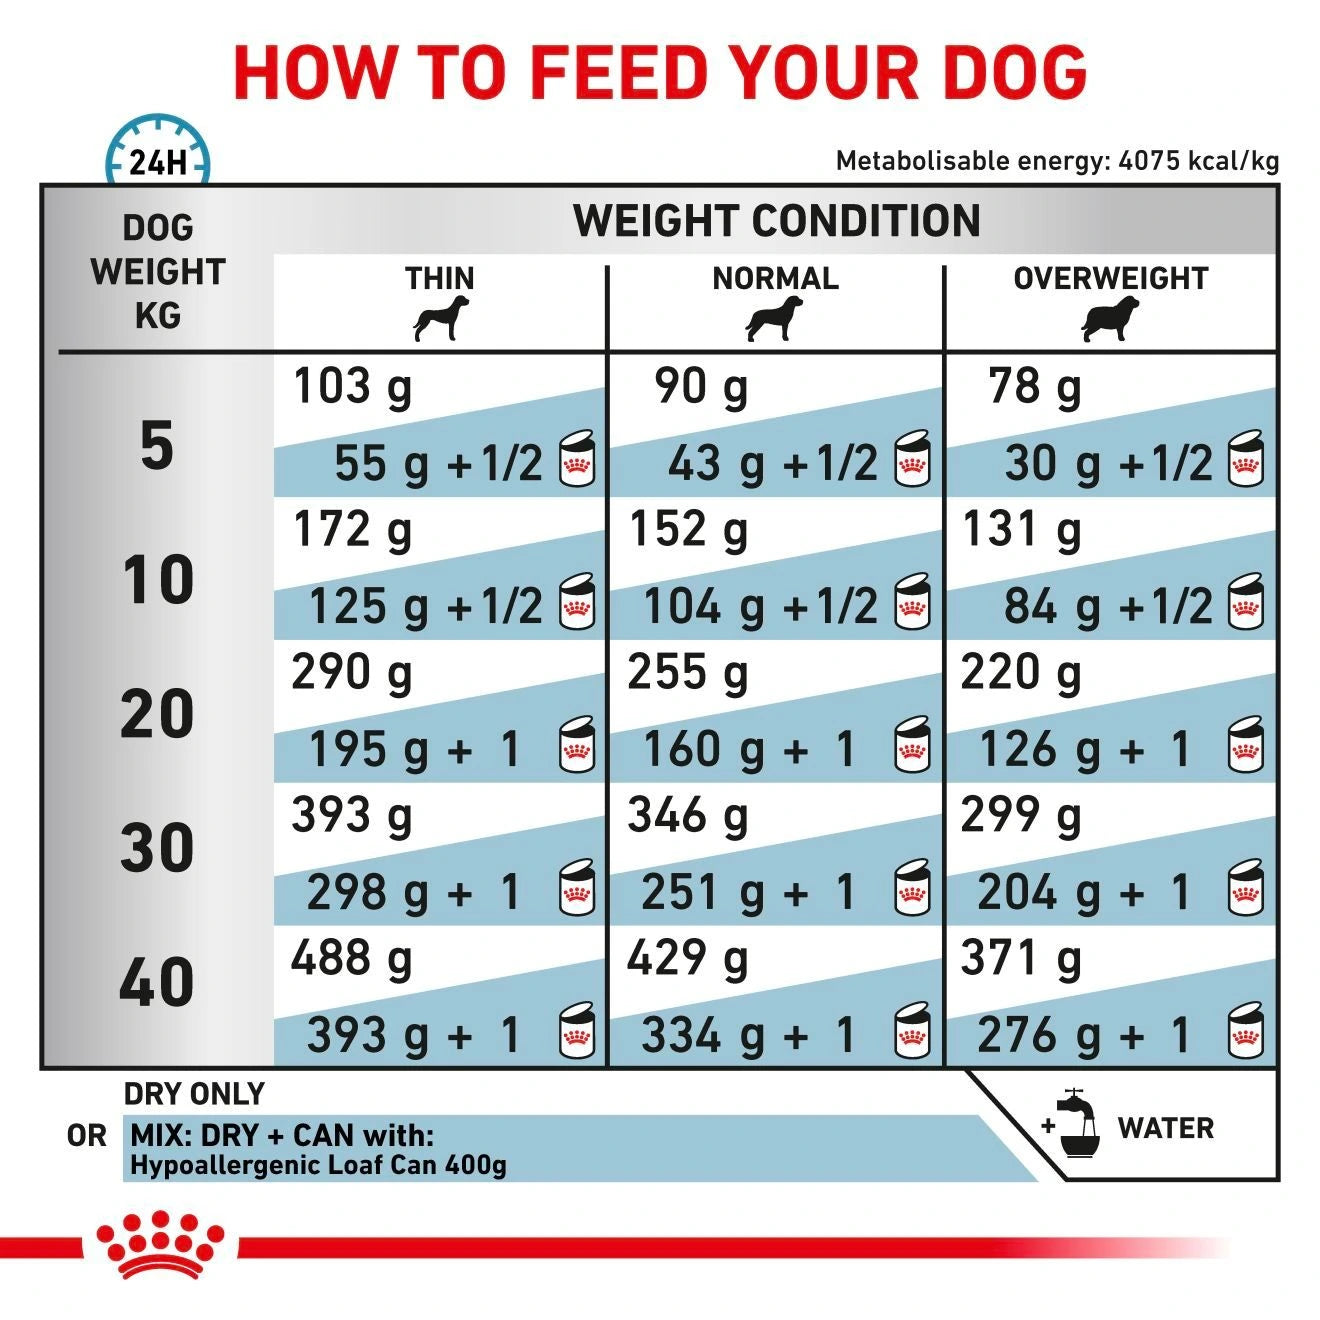 Royal Canin - Canine Hypoallergenic Adult feeding guide